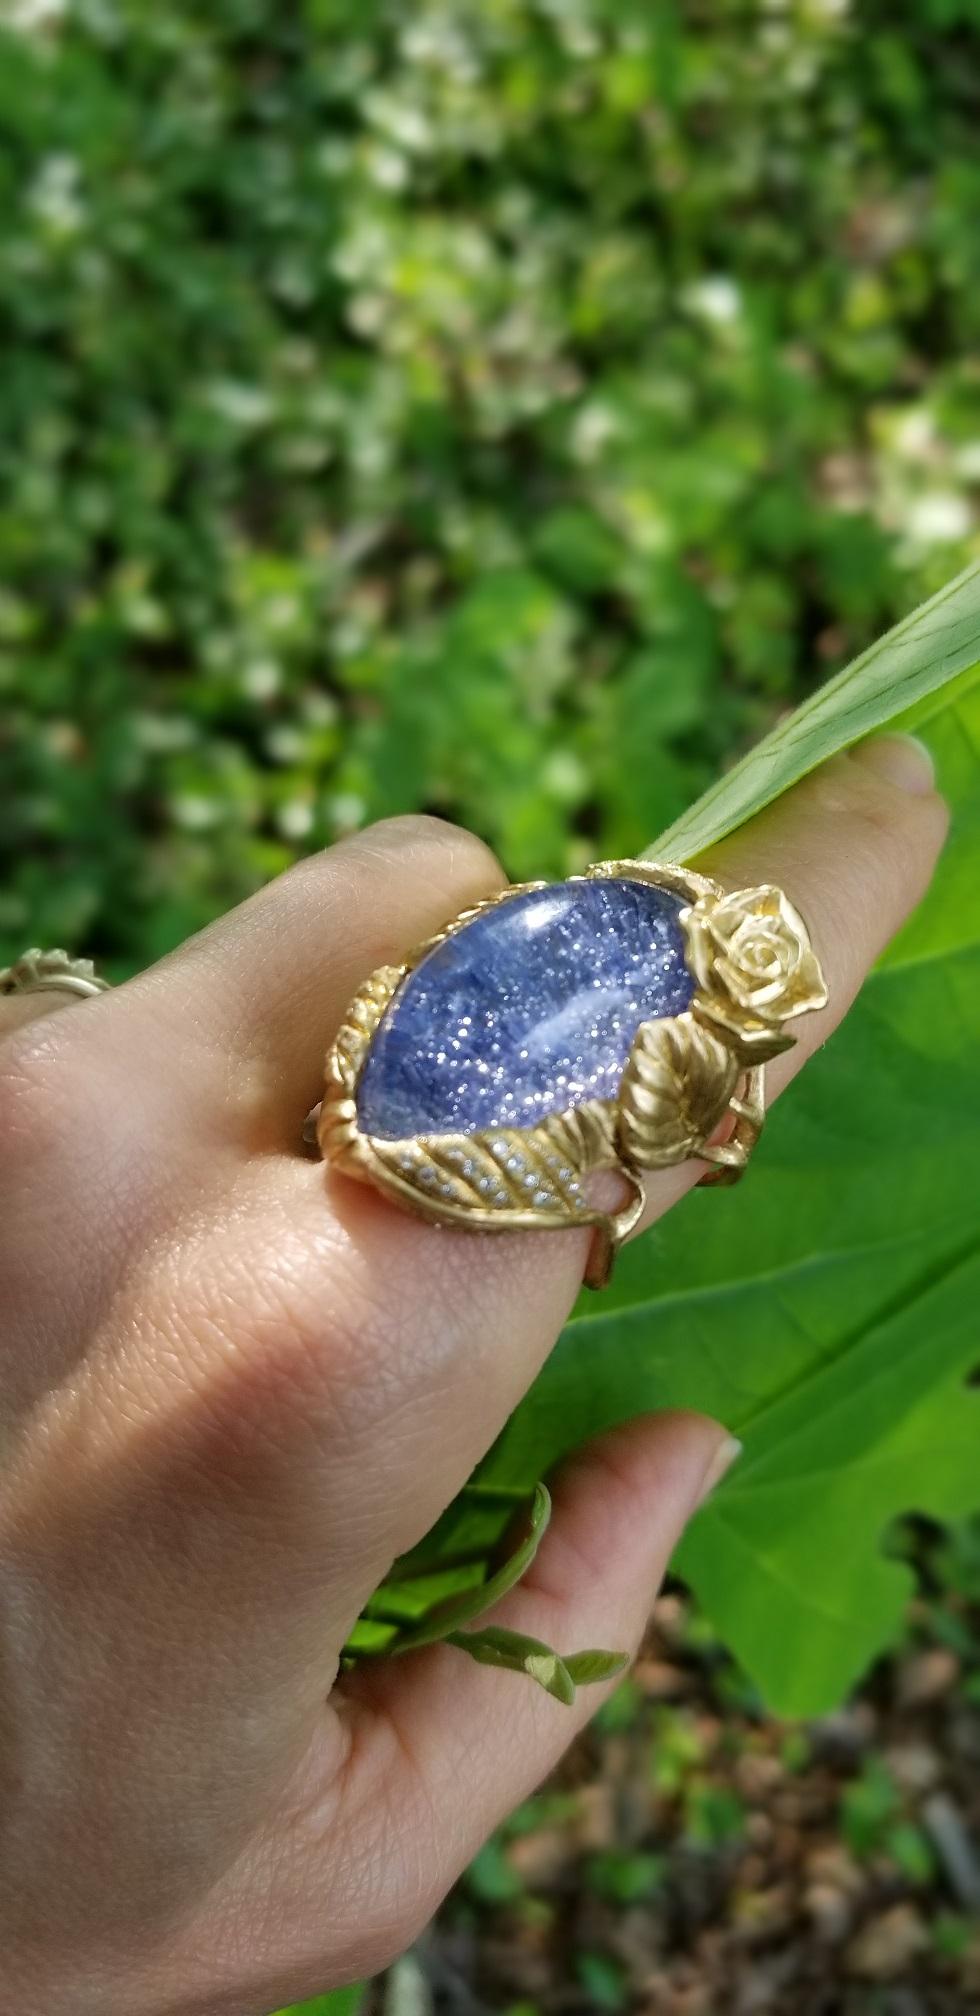 One-of-a-kind, 18k yellow gold, dumortierite in quartz, diamonds

Nestled in a bed of roses, this one-of-a-kind Dumortierite gemmy dew-drop glistens, revealing a universe of sparkling stars reflected in the blue water.
The 18k recycled yellow gold